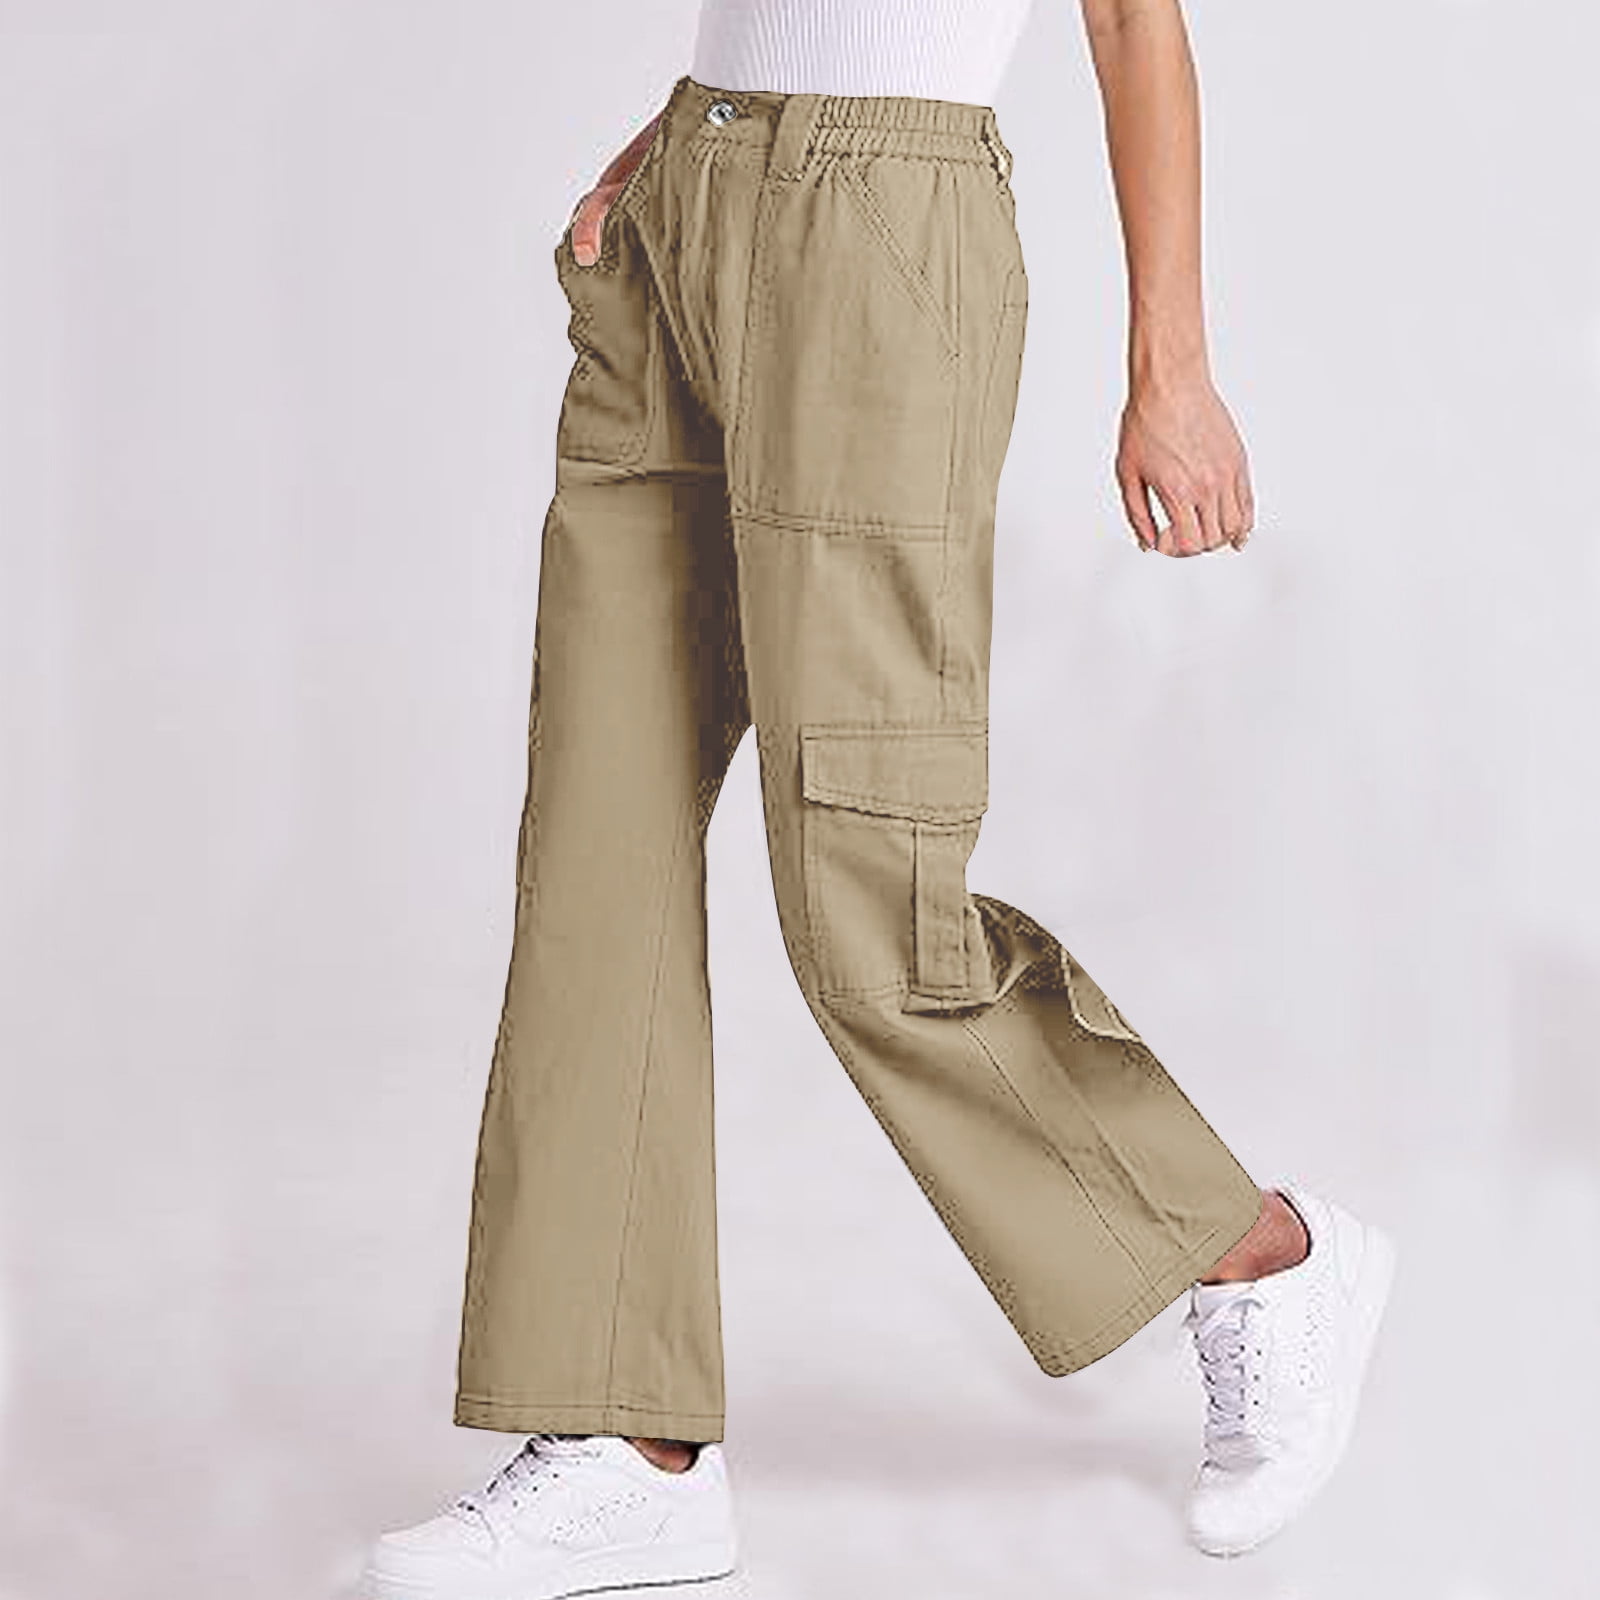 Vintage High Waist Cotton Summer Trousers in Beige for Women Size M / D 40  Pleated Straight Leg Canvas Khaki Pants With Pockets NVS230 